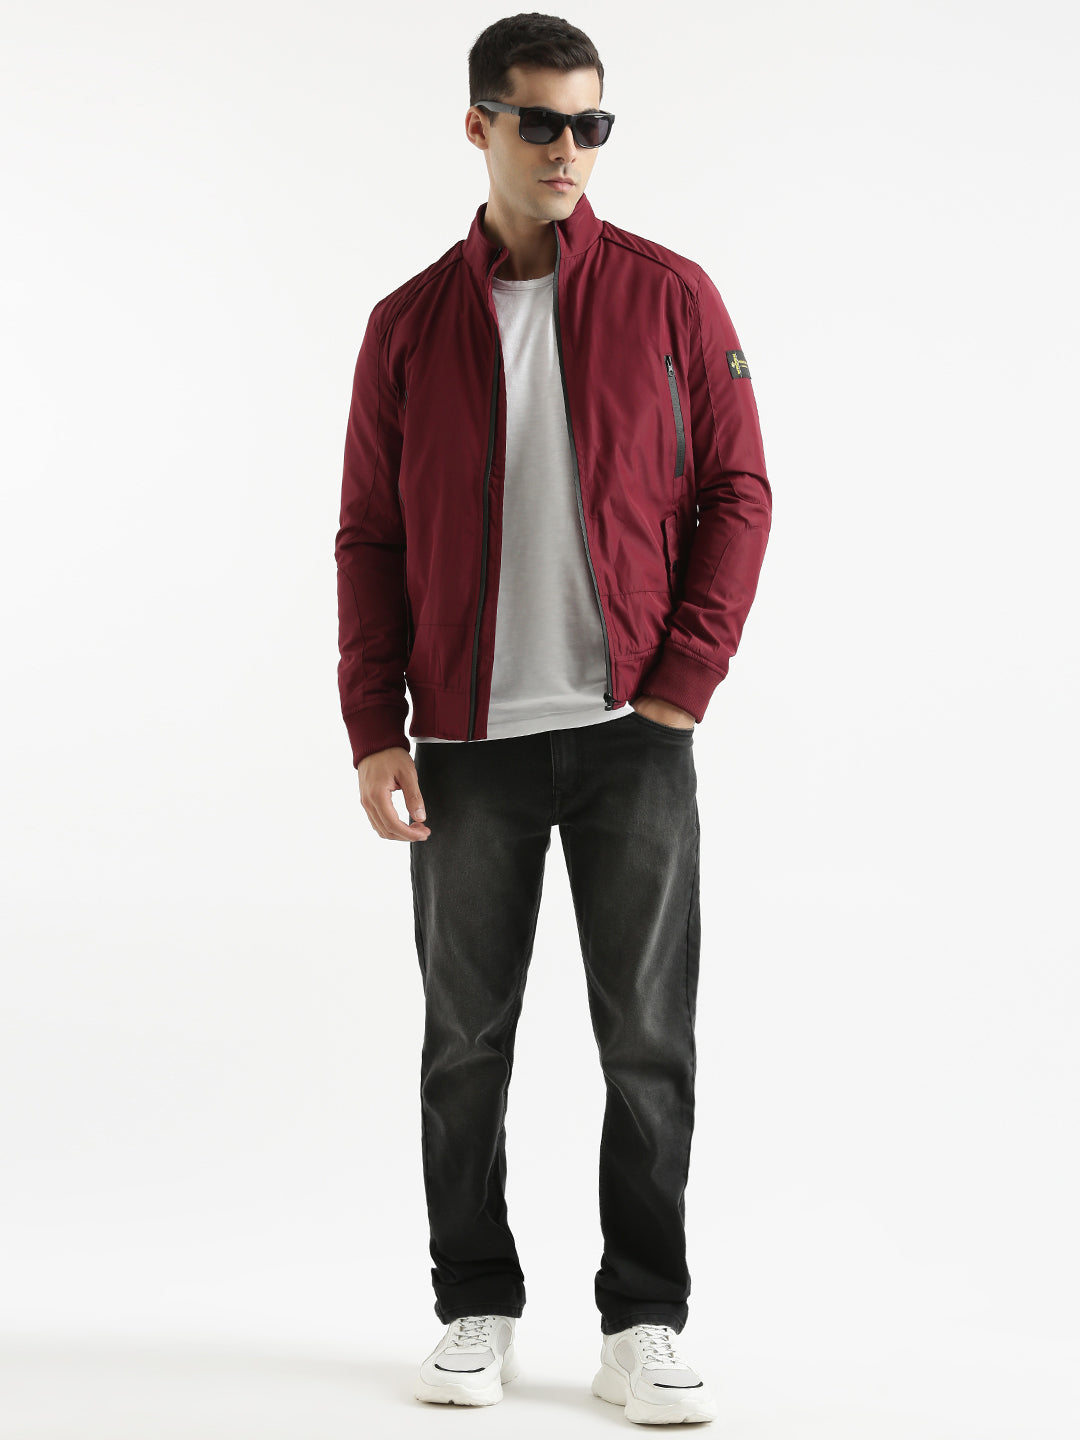 Solid Red Technical Jacket